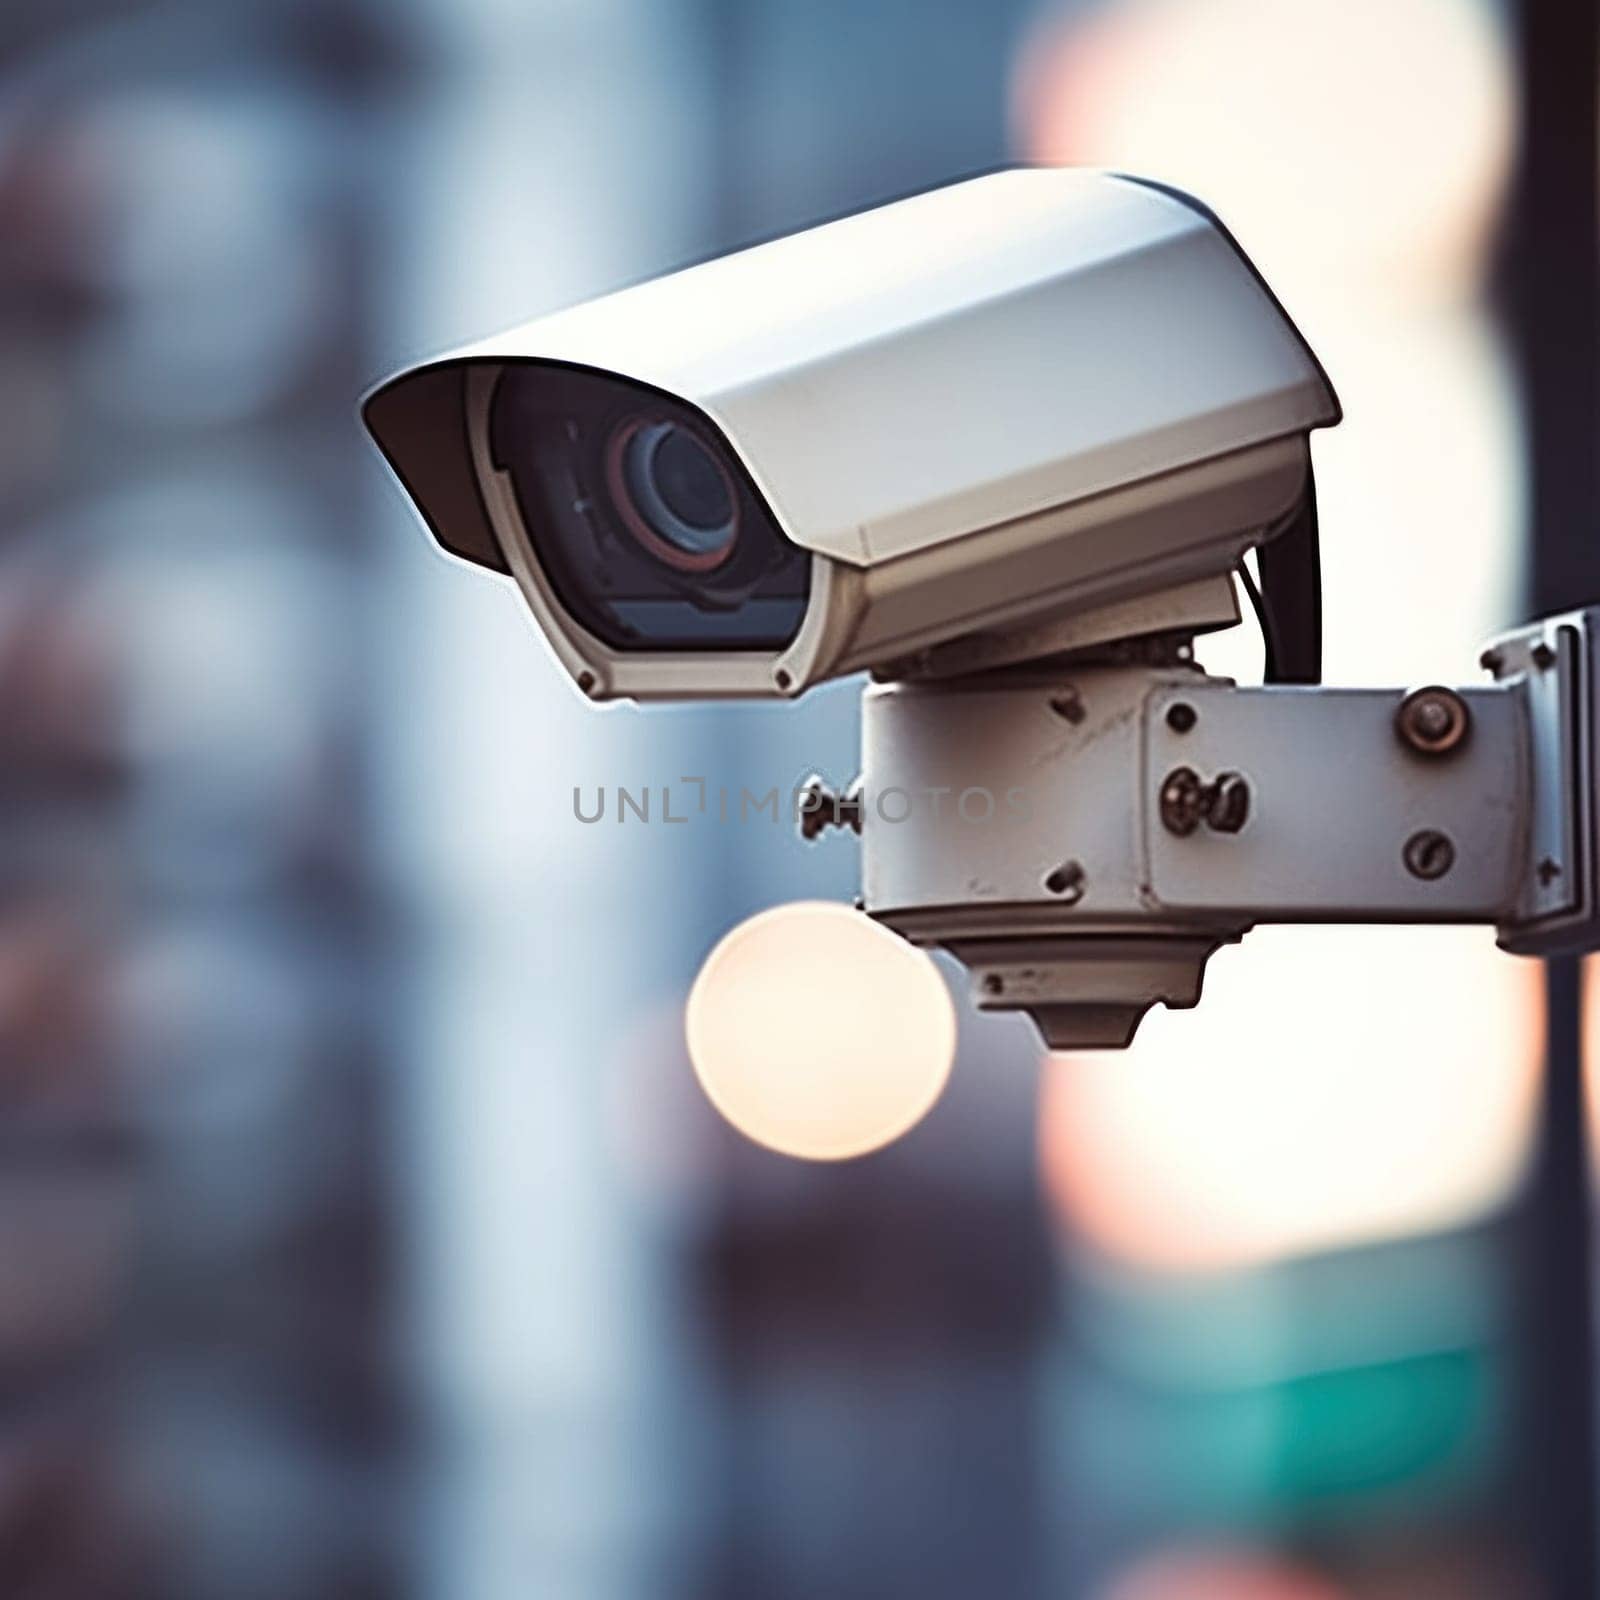 A close up of a security camera mounted on the side of building